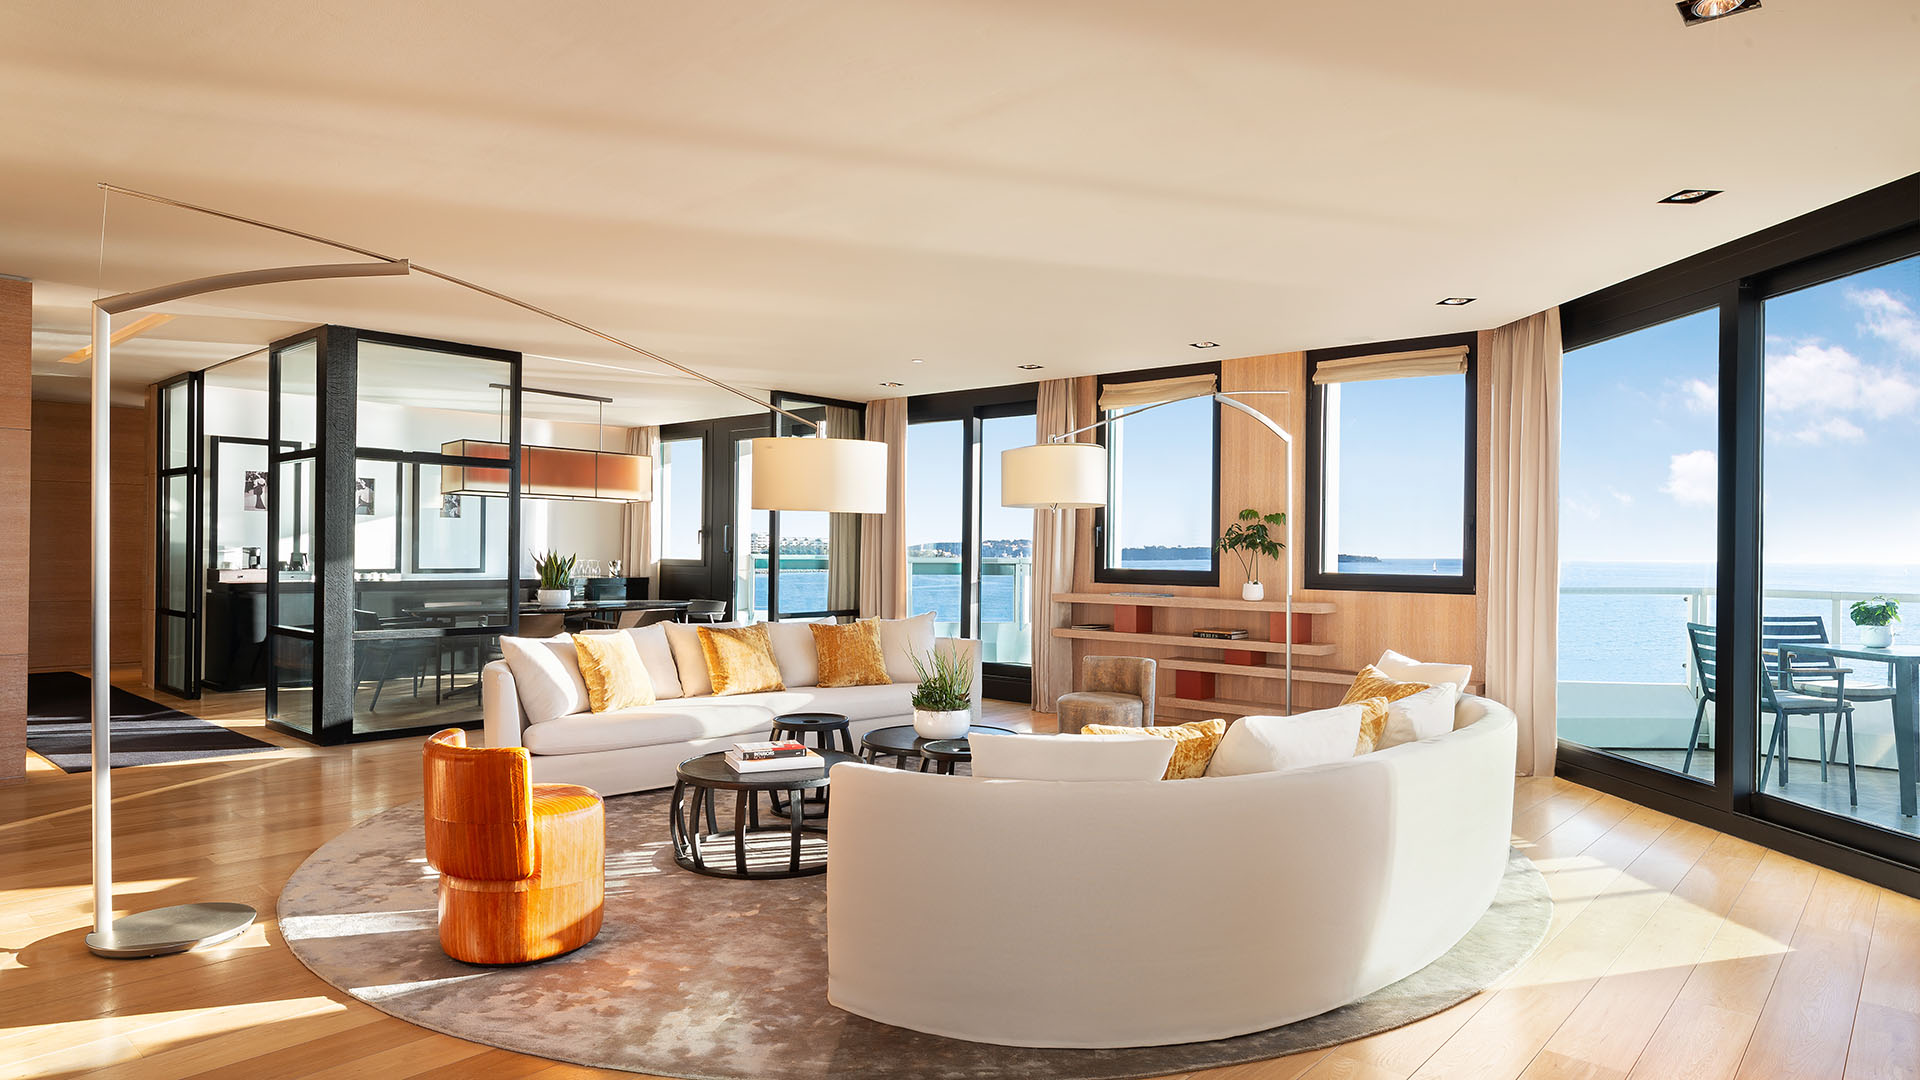 JW Marriott Cannes Presidential suite living room and dining room with ocean views